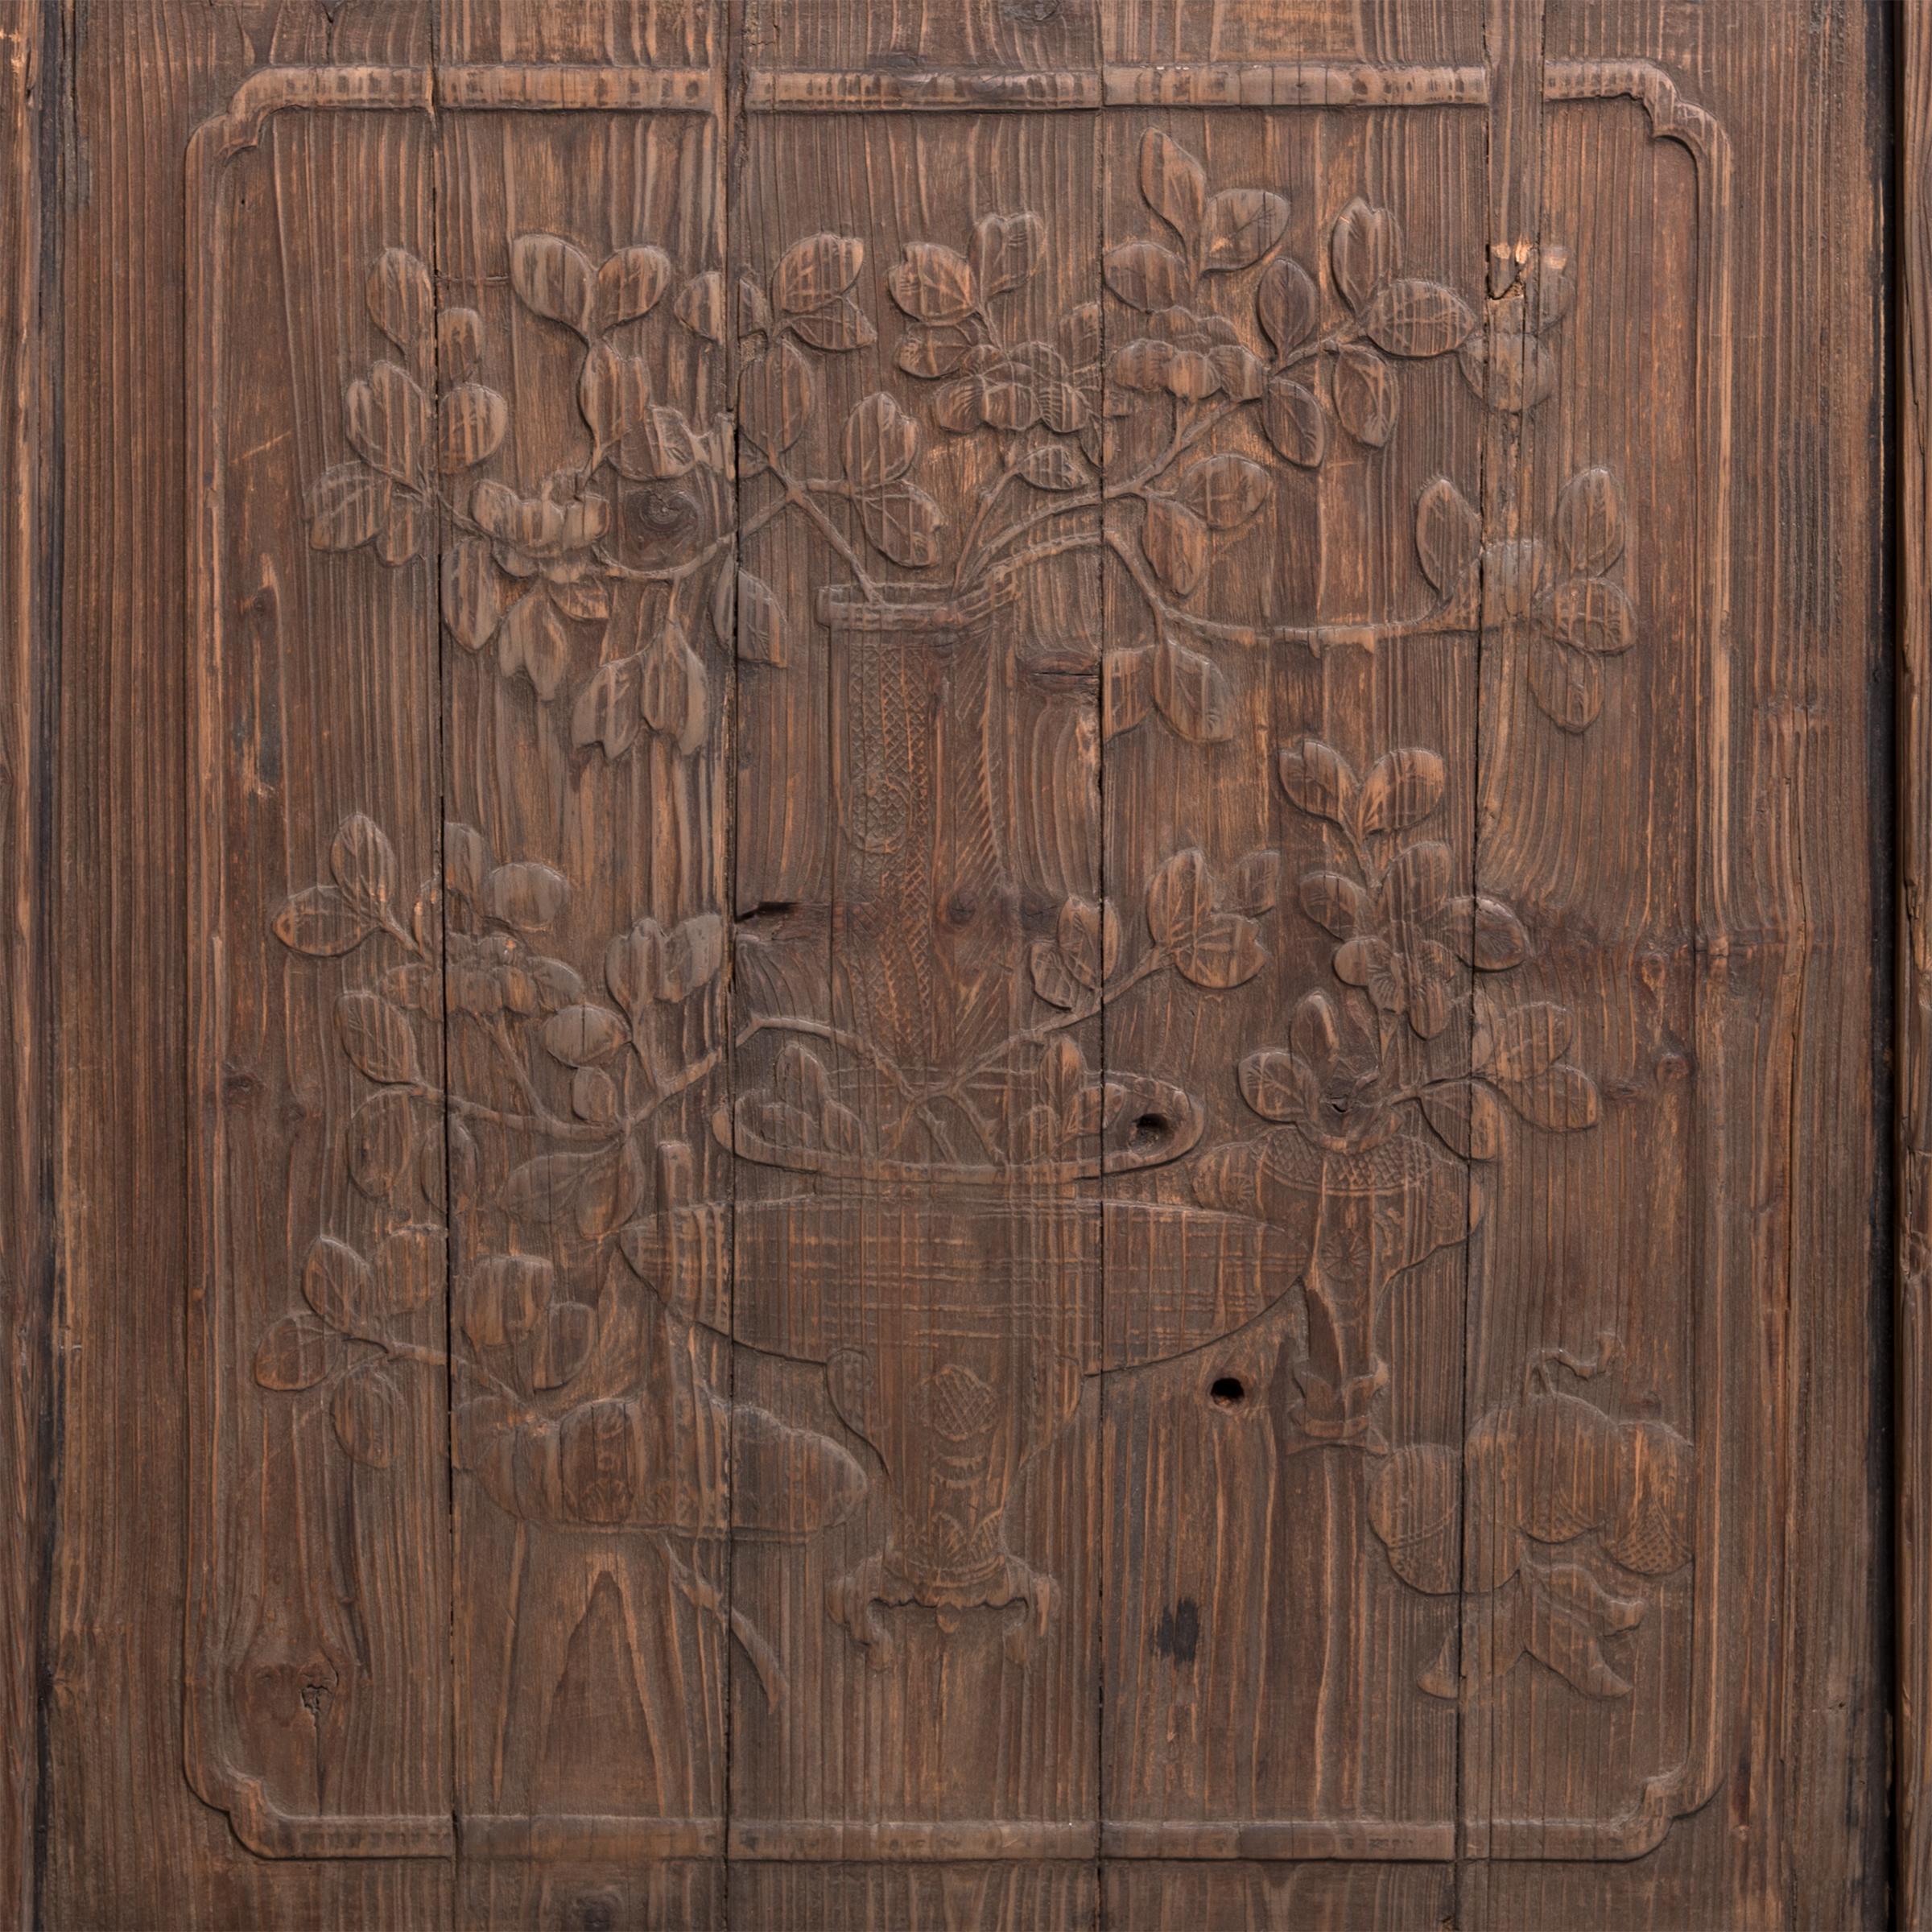 Chinese Carved Architectural Panel with Fruit and Flora, c. 1850 - Qing Mixed Media Art by Unknown